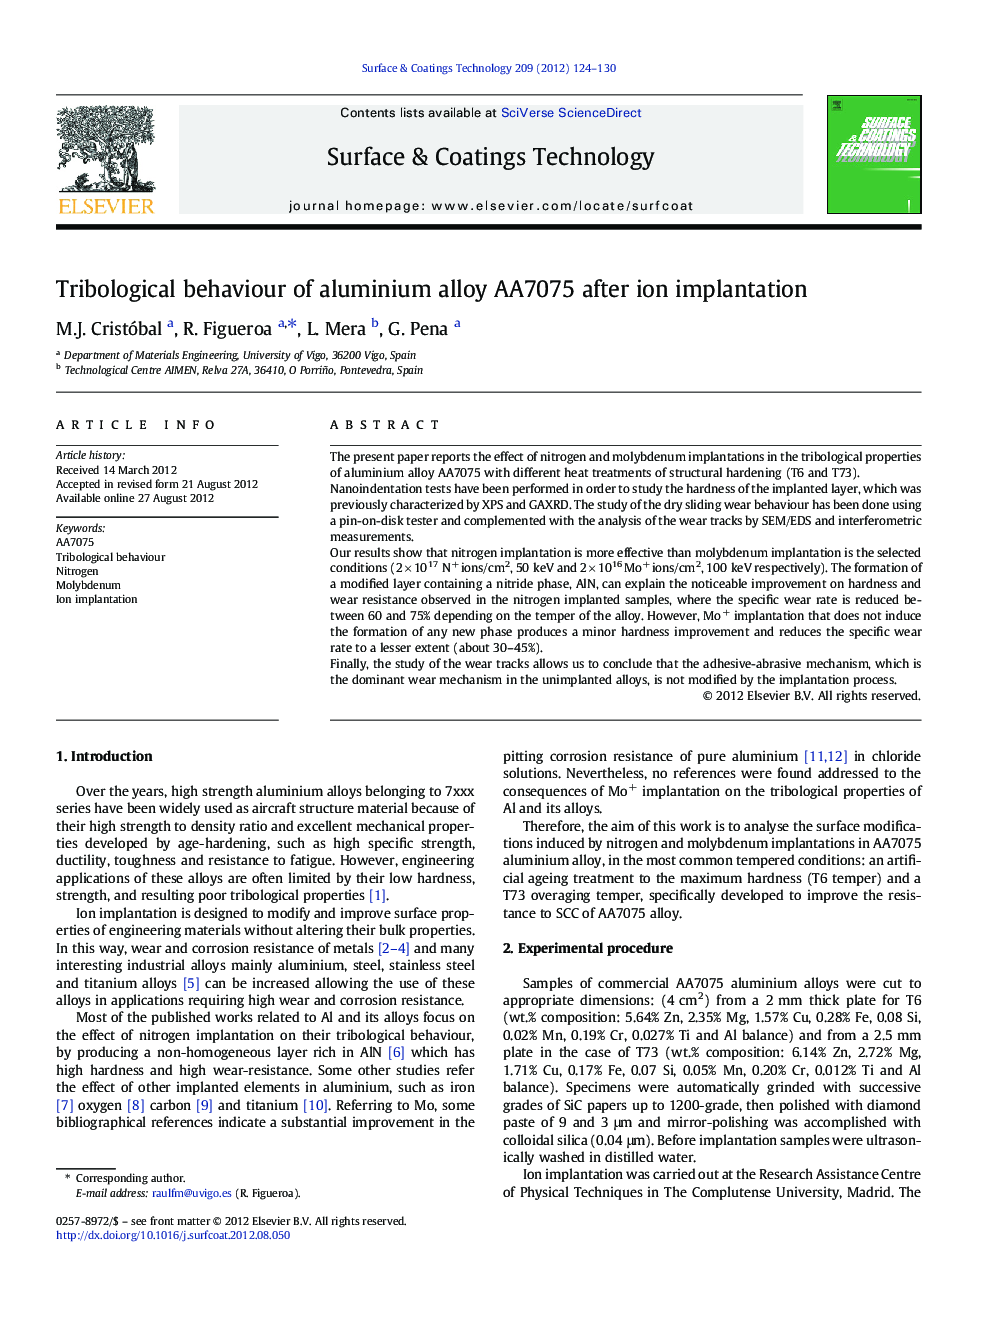 Tribological behaviour of aluminium alloy AA7075 after ion implantation